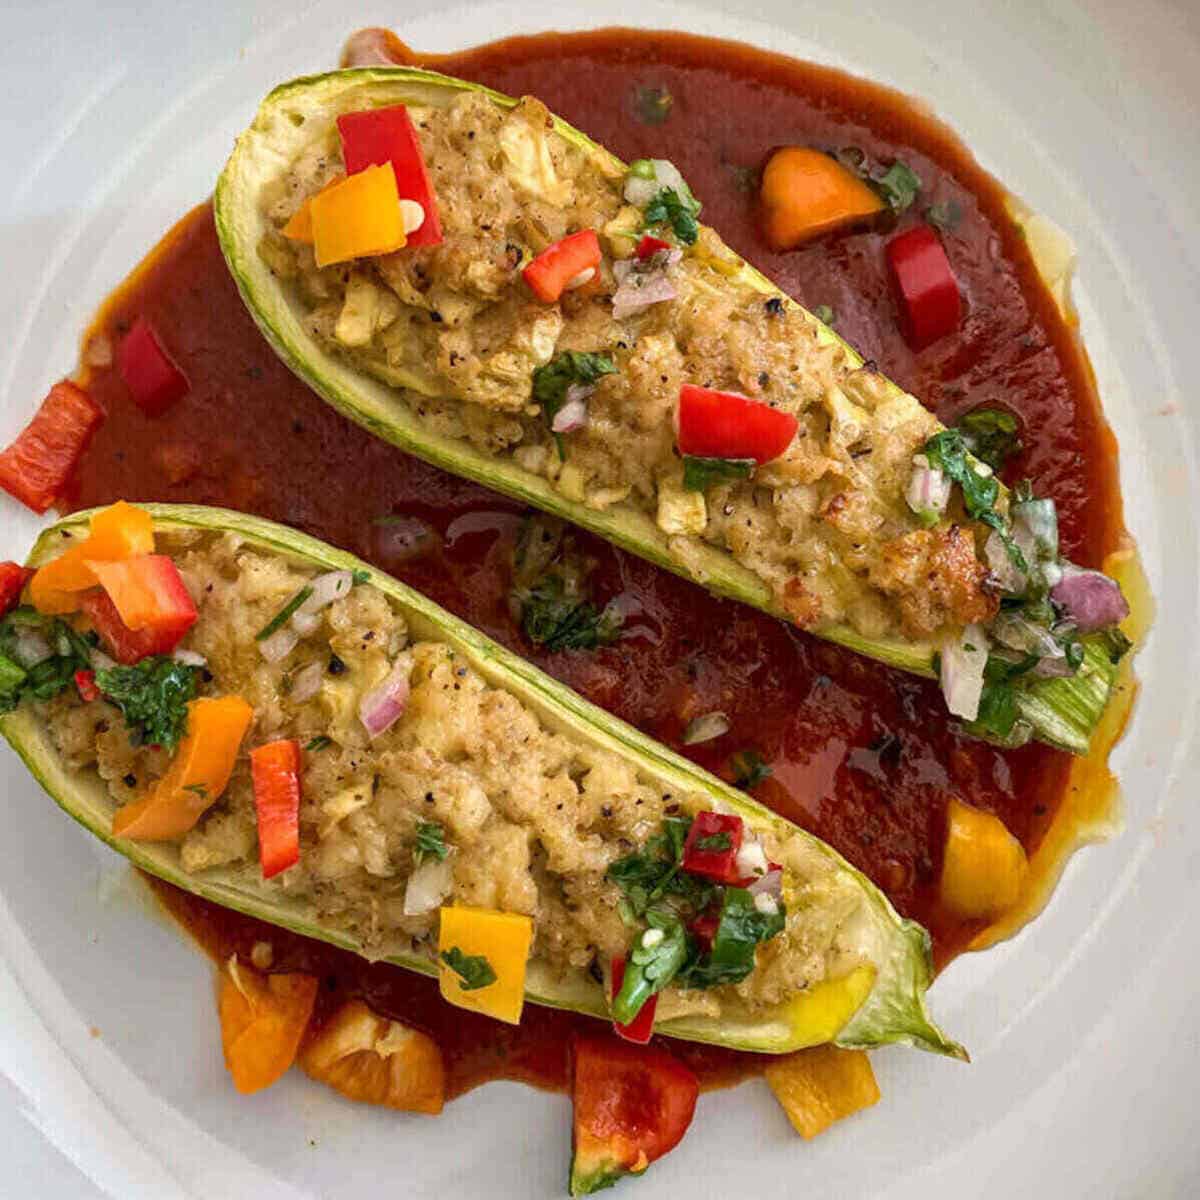 Vegetarian zucchini boats stuffed with crumbled paneer served on a bed of tomato sauce and with herbed salsa garnish.